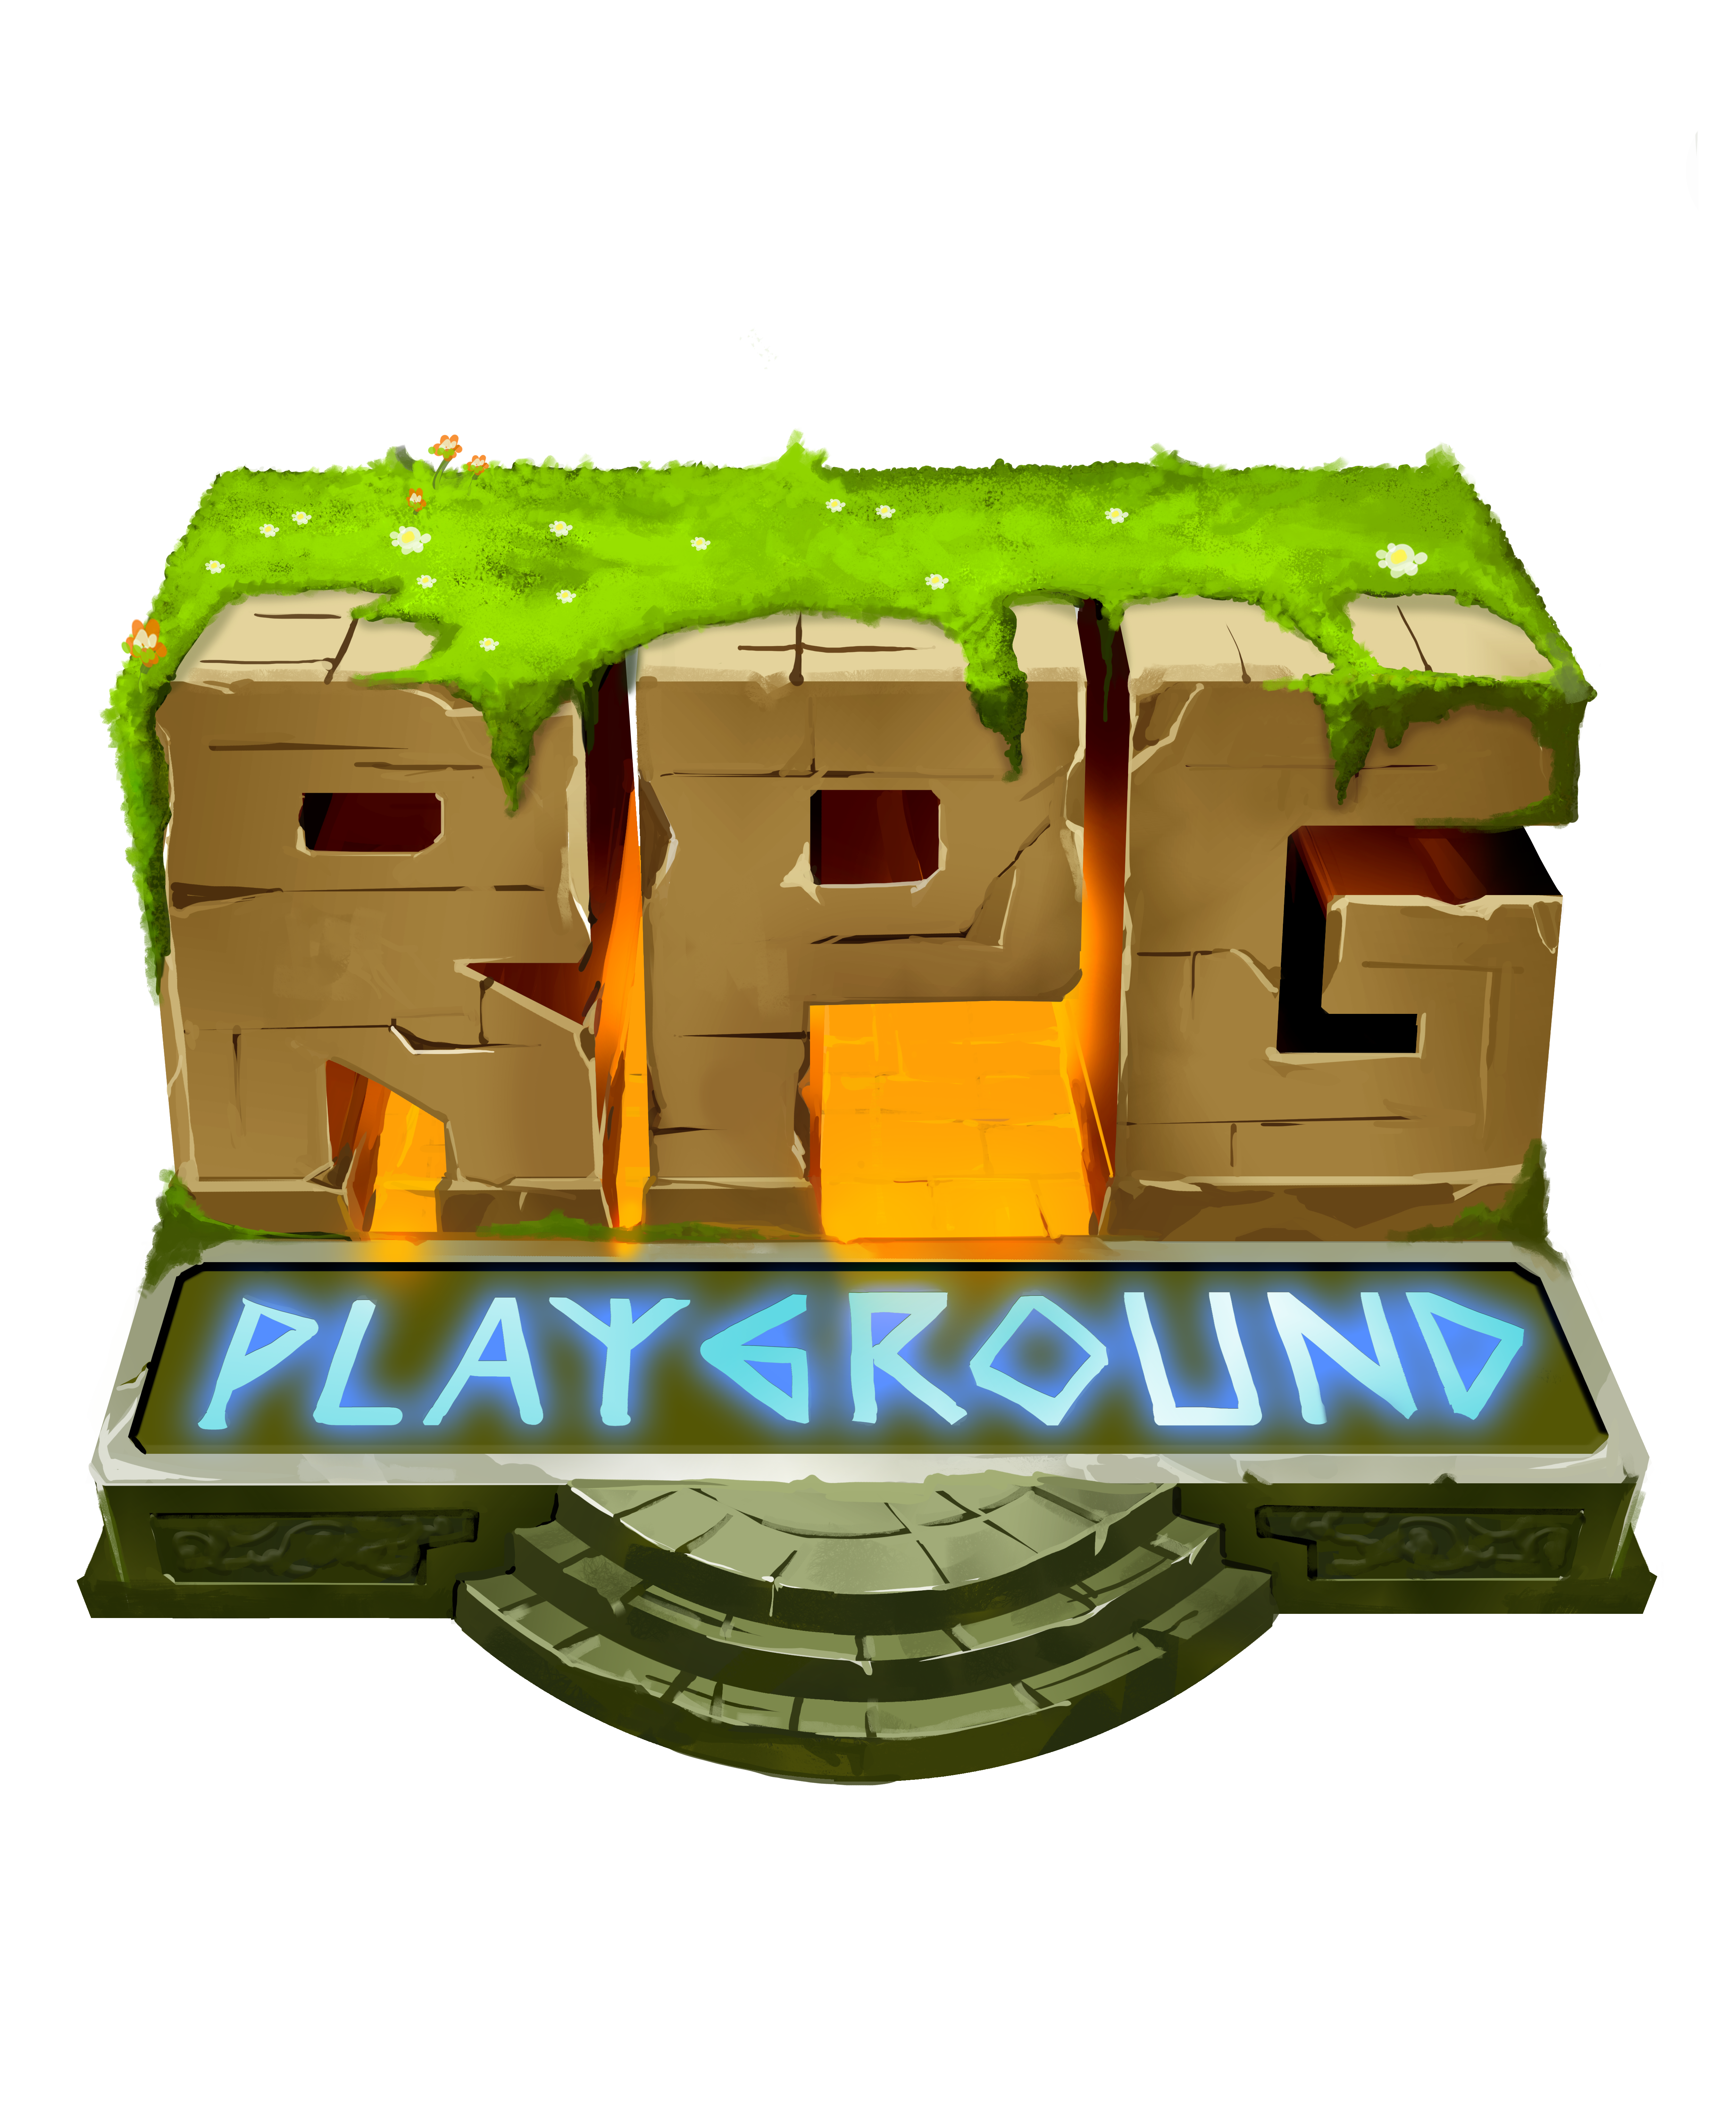 RPG Playground – Make an RPG game without coding for free